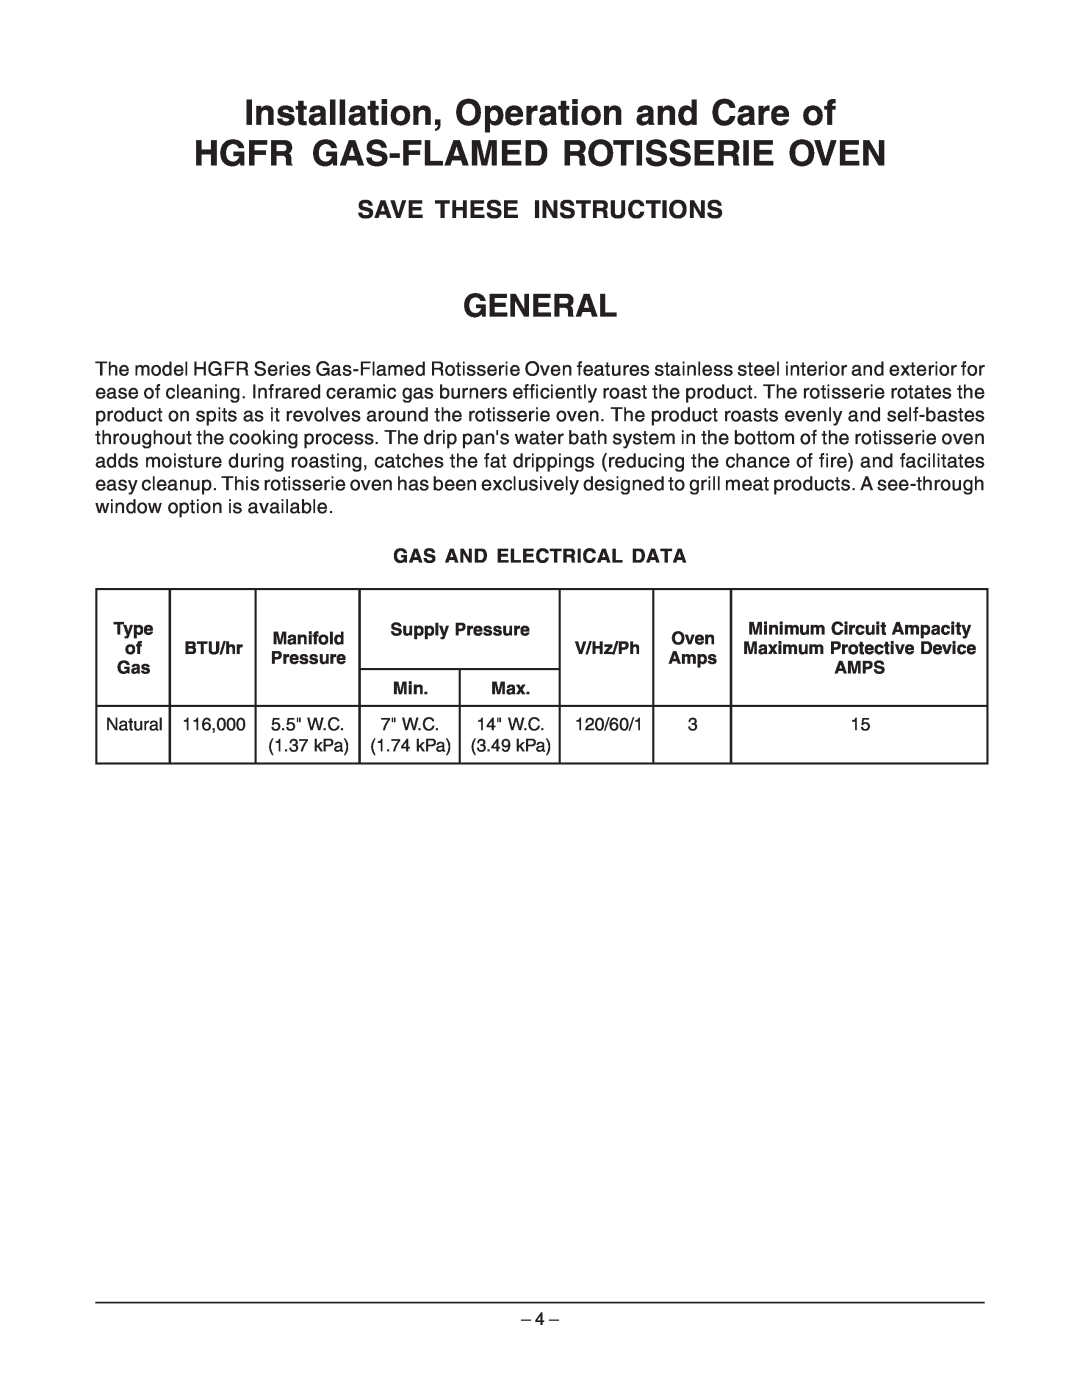 Hobart ML-132055 General, Installation, Operation and Care of HGFR GAS-FLAMED ROTISSERIE OVEN, Save These Instructions 